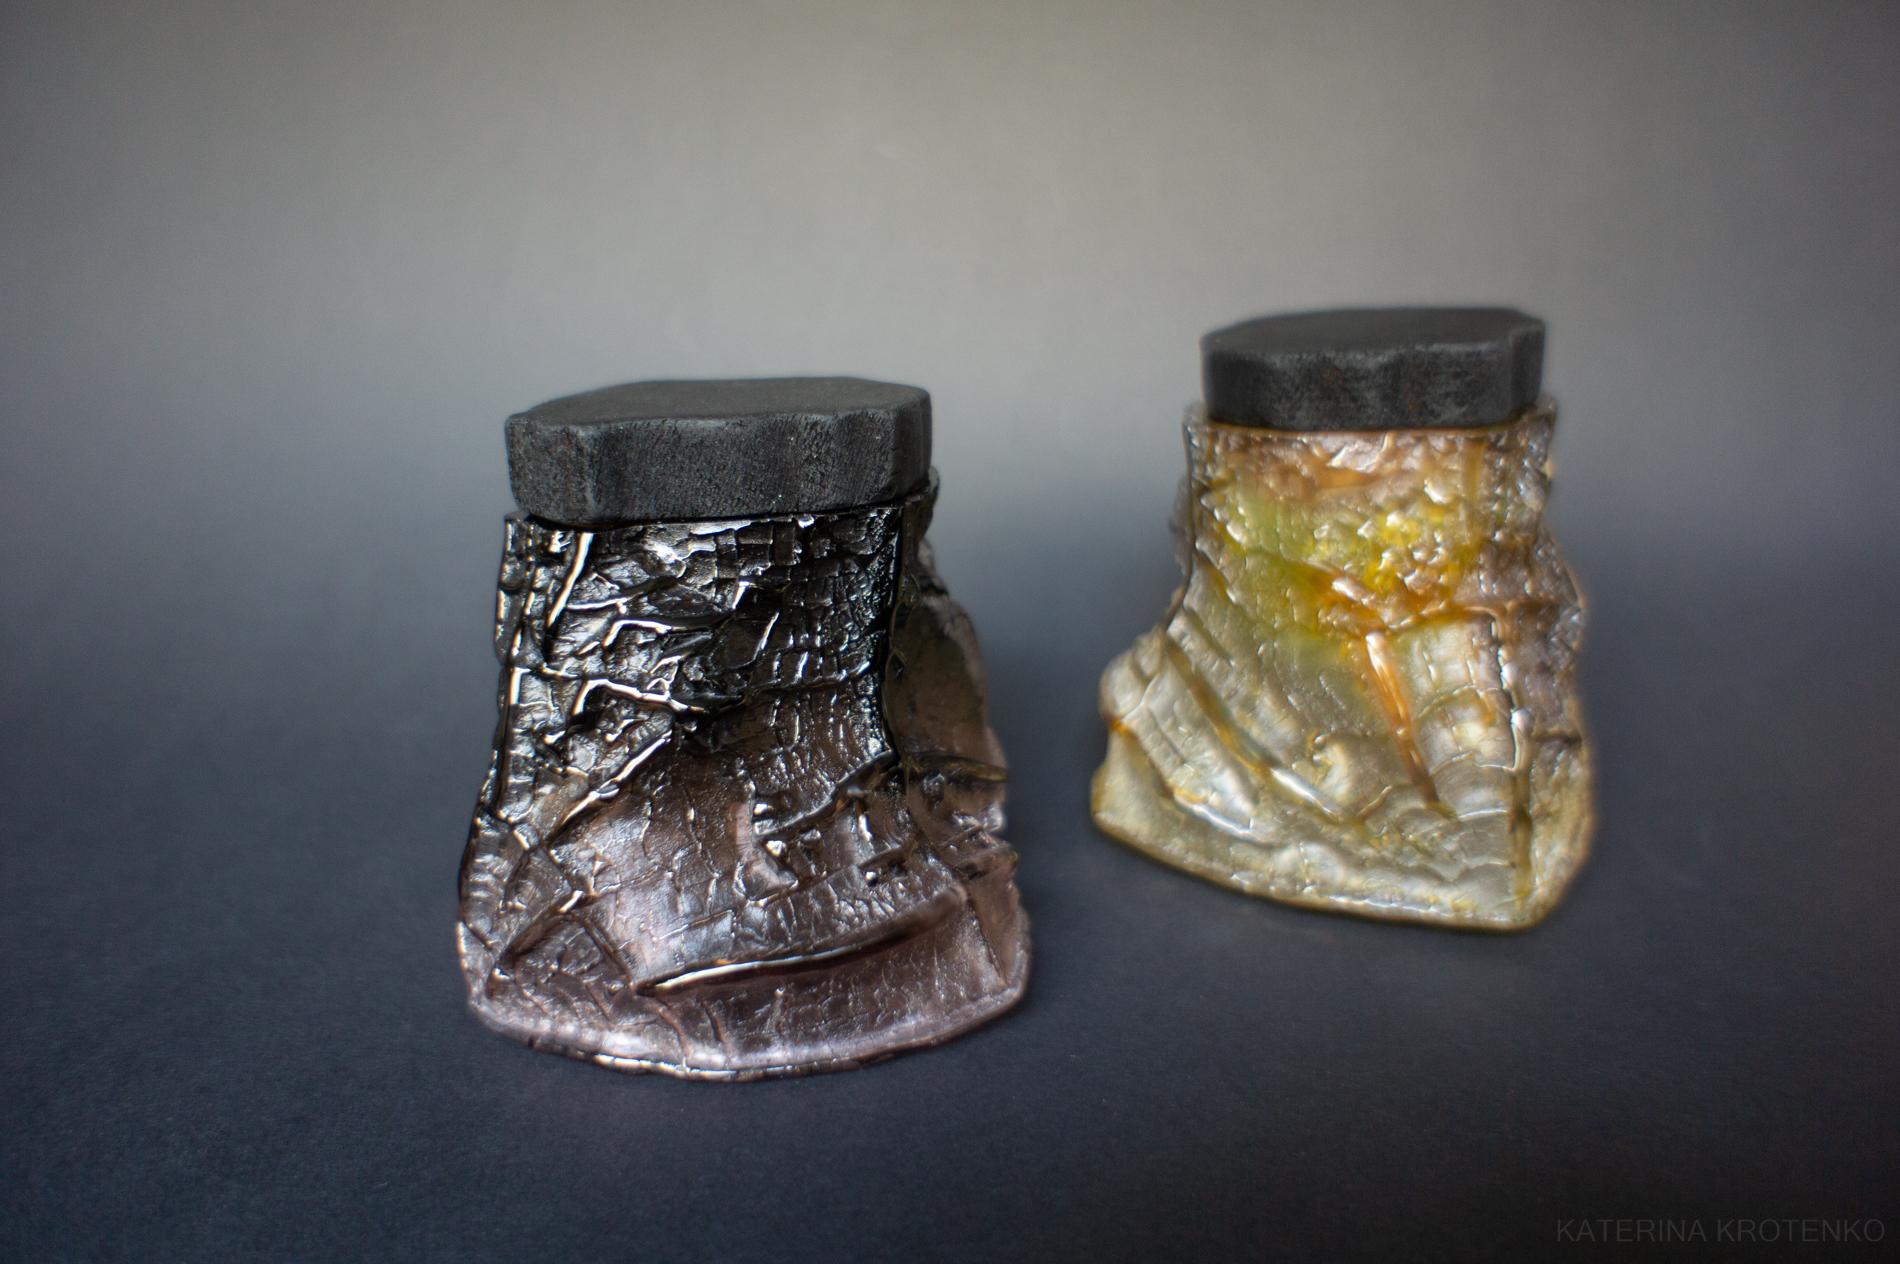 Drago — a pair of two glass treasuries, golden dragon & grounded brown